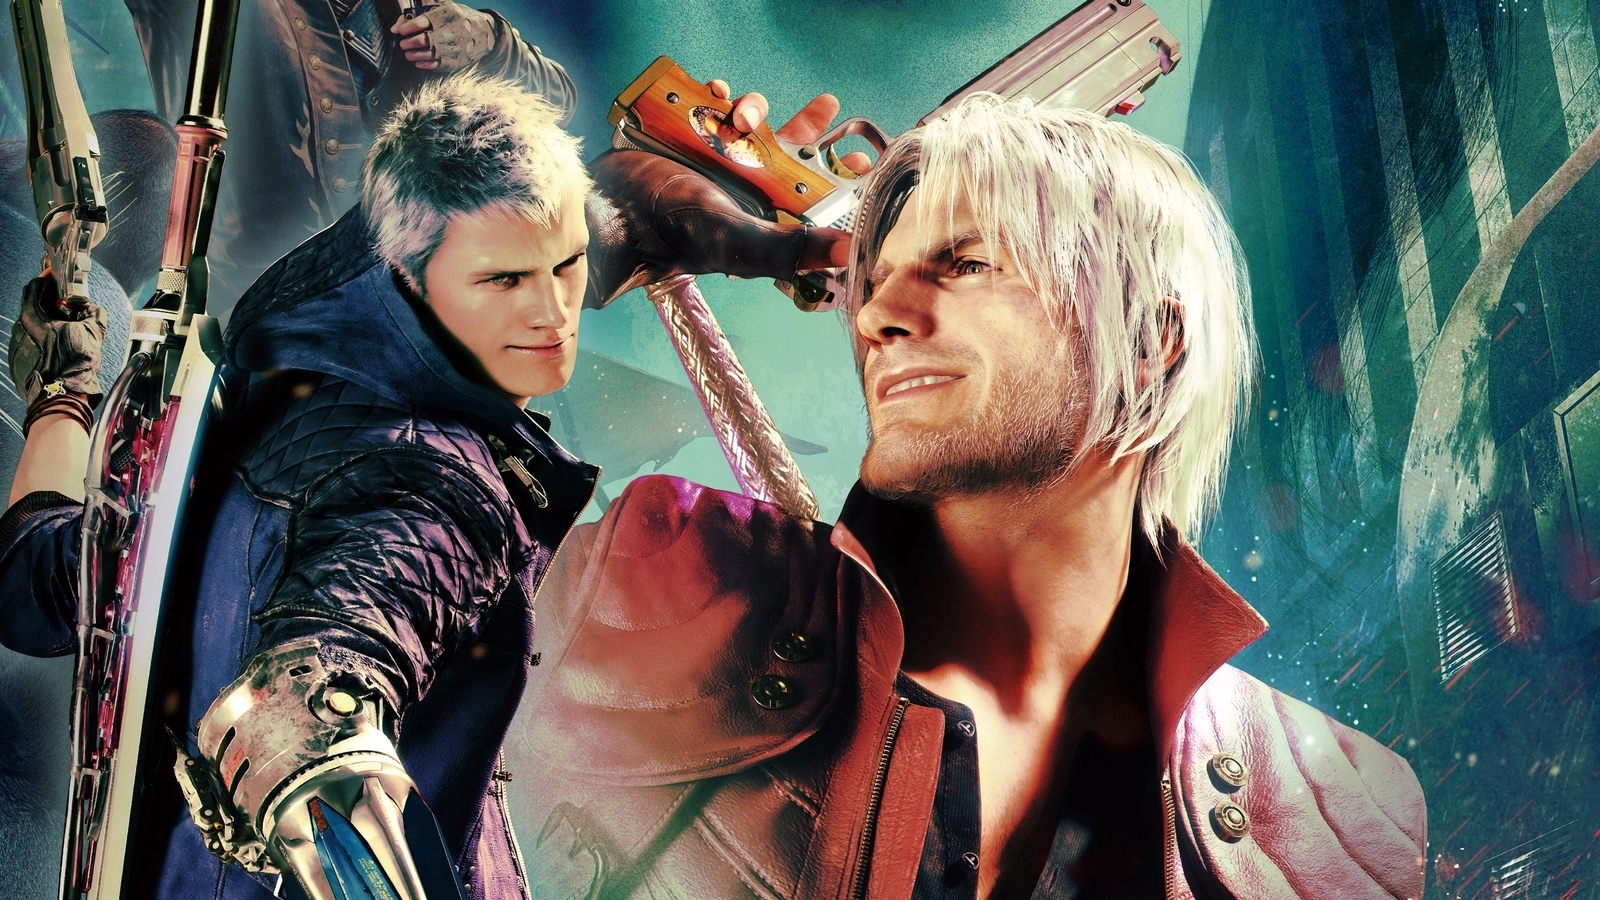 Devil May Cry 5 Special Edition resolution and frame rate options detailed  - Gematsu